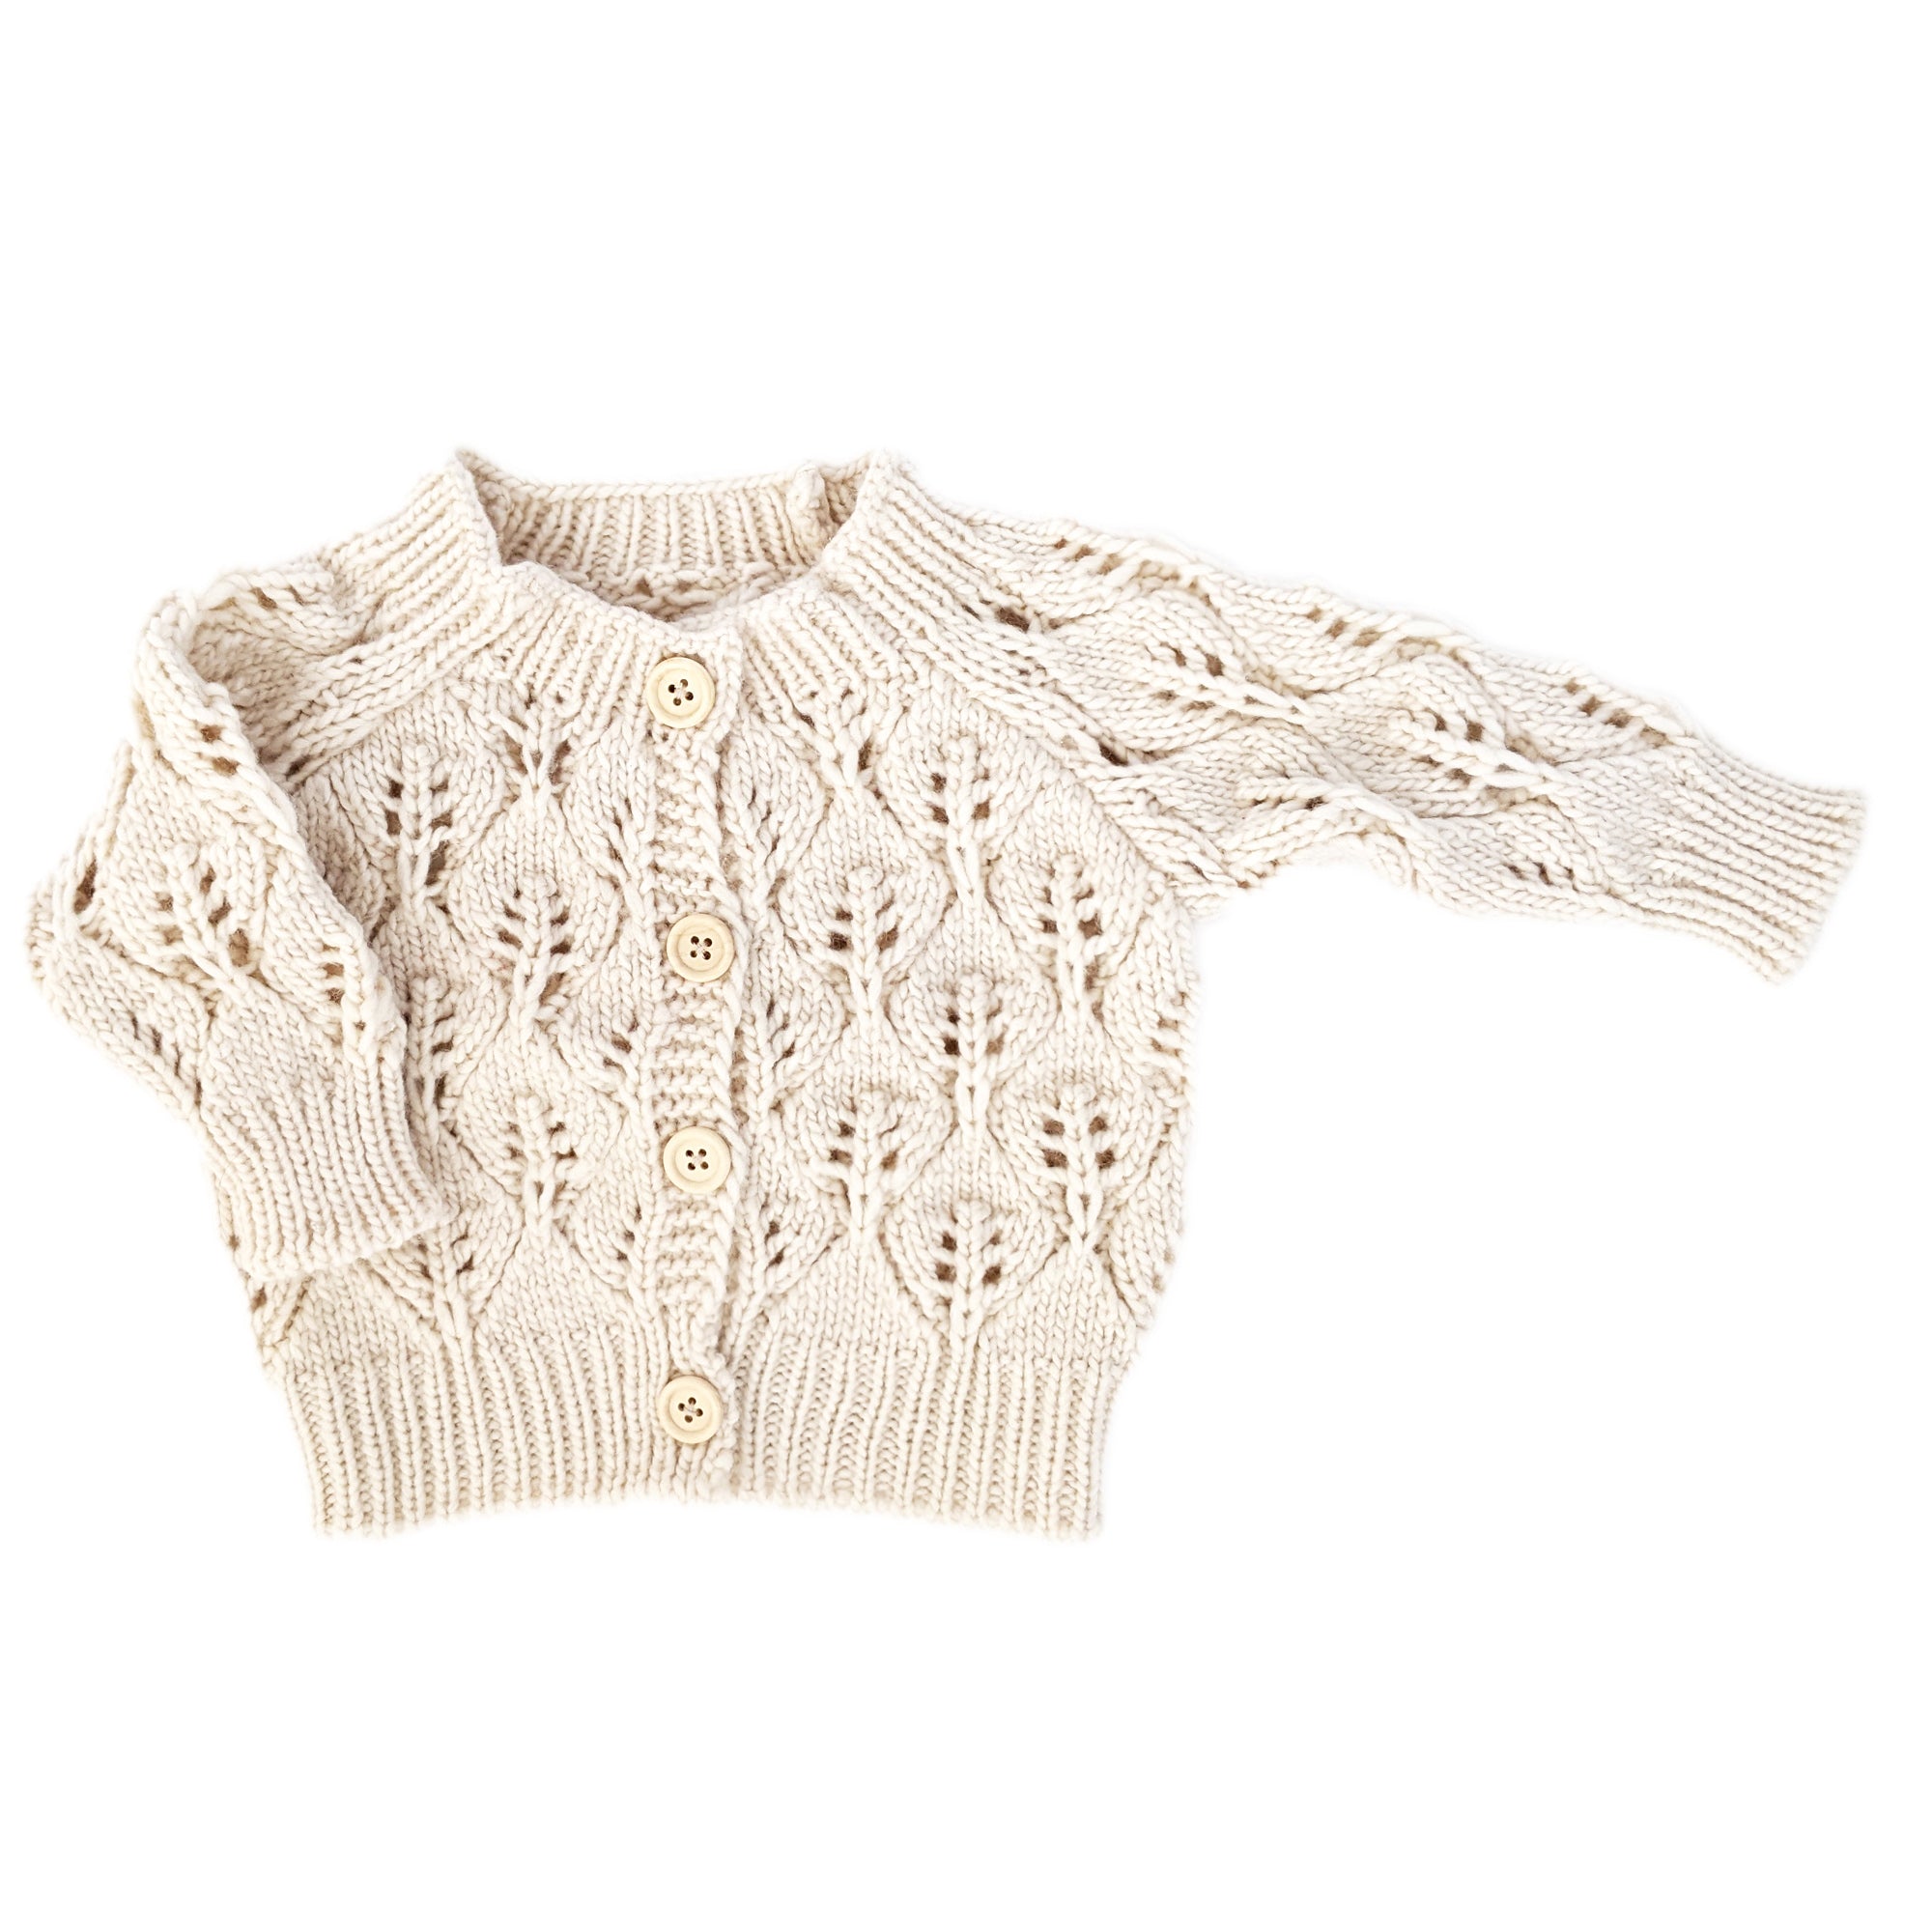 Huggalugs_Natural Leaf Lace Sweater_Tops